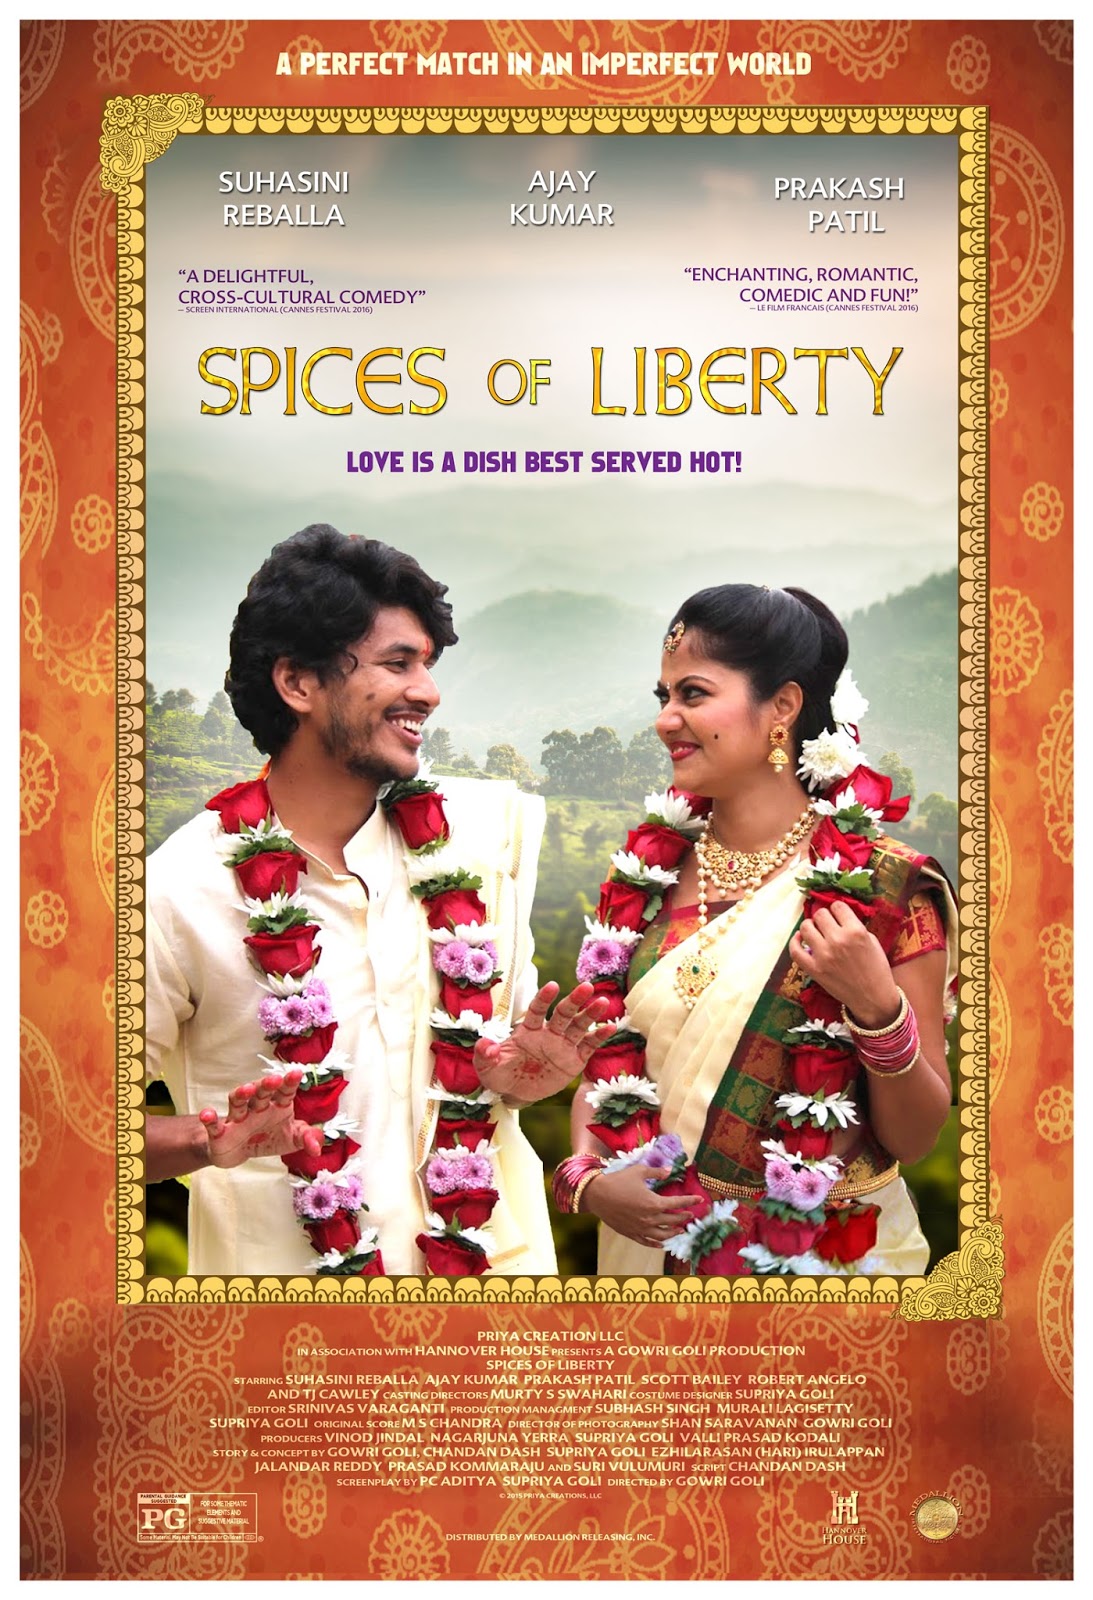 Spices of Liberty